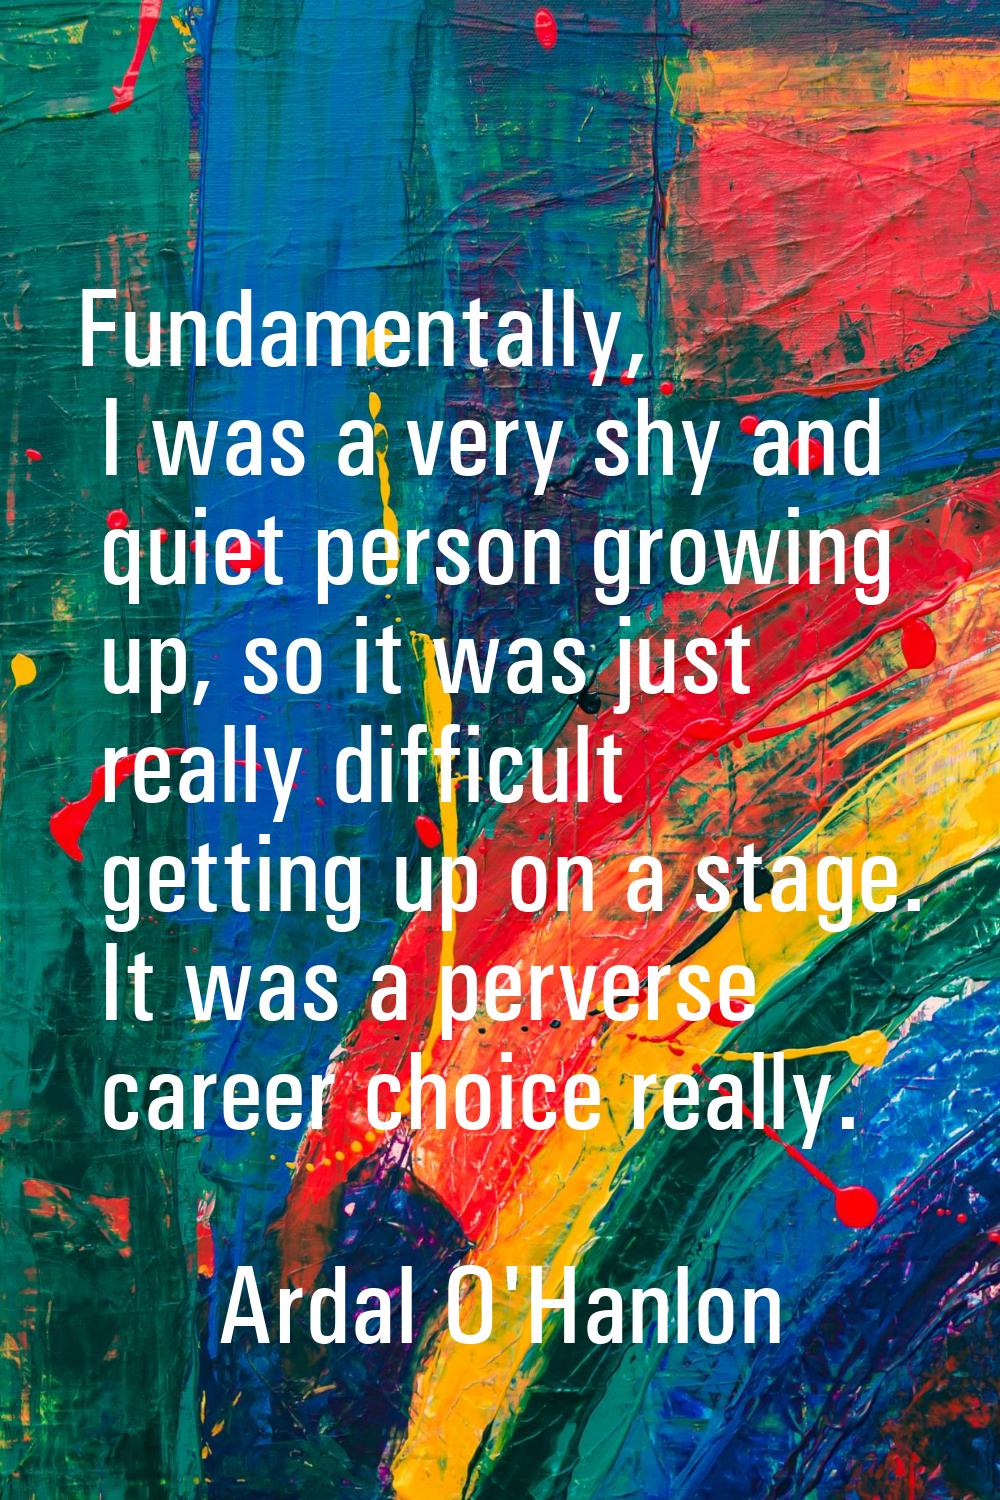 Fundamentally, I was a very shy and quiet person growing up, so it was just really difficult gettin